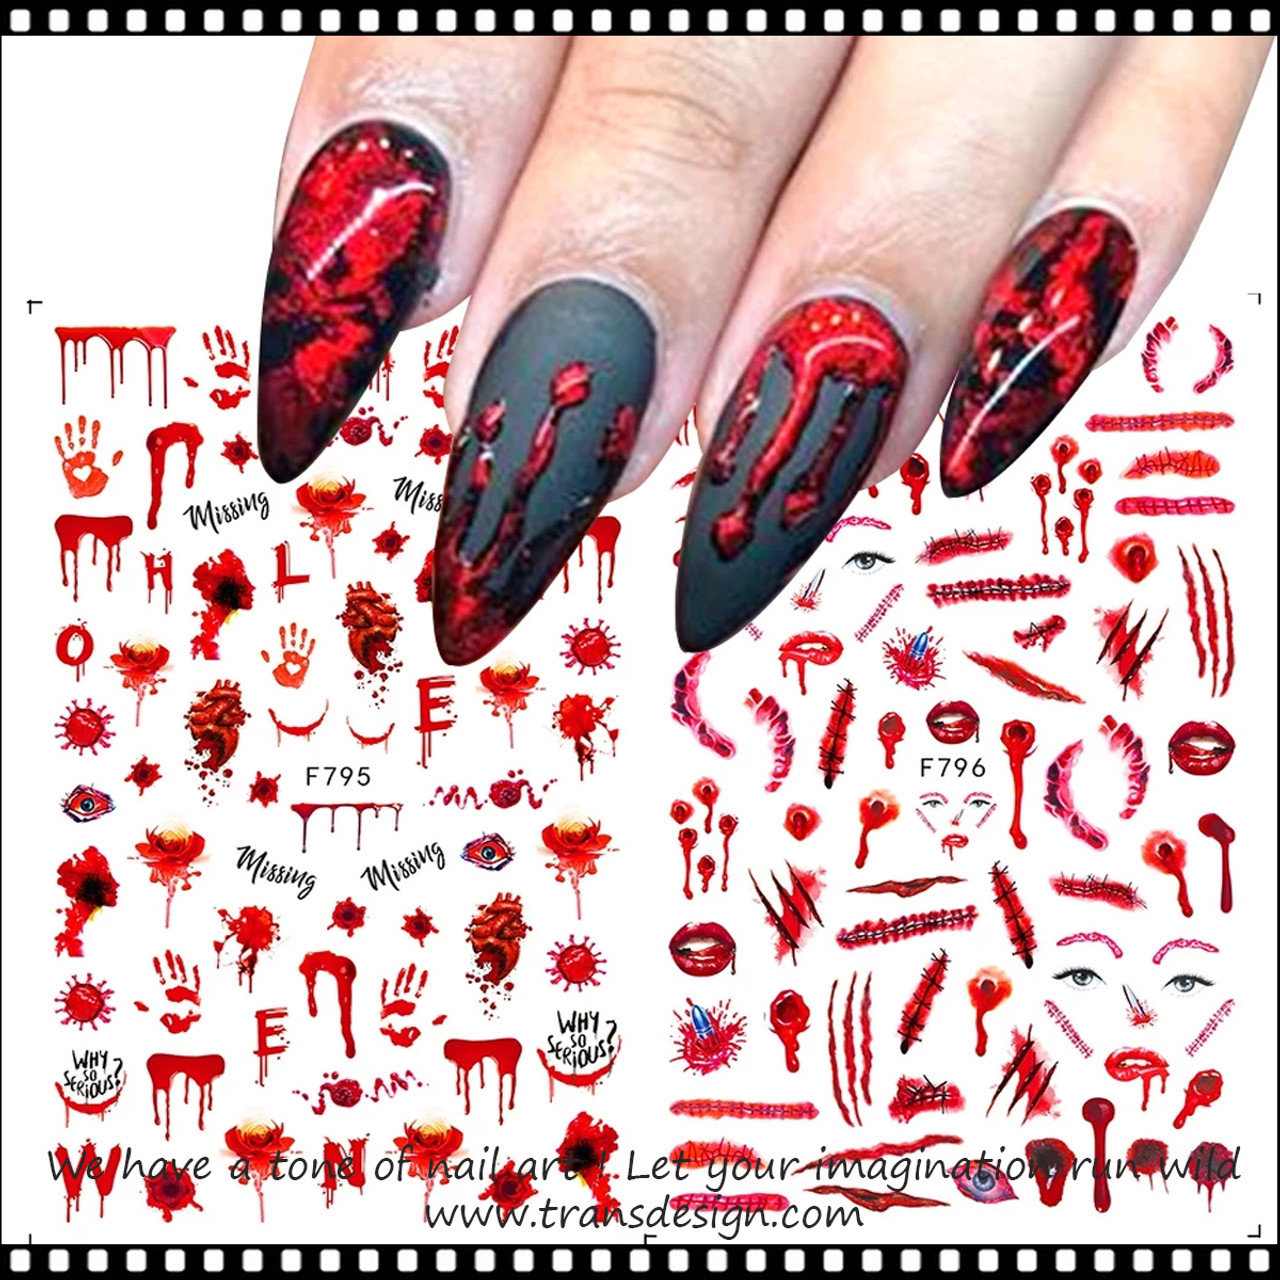 TailaiMei 1500 Pcs Halloween Nail Decals Stickers, 12 Sheets Self-Adhesive  DIY Nail Art Tips Stencil for Halloween Party, Include